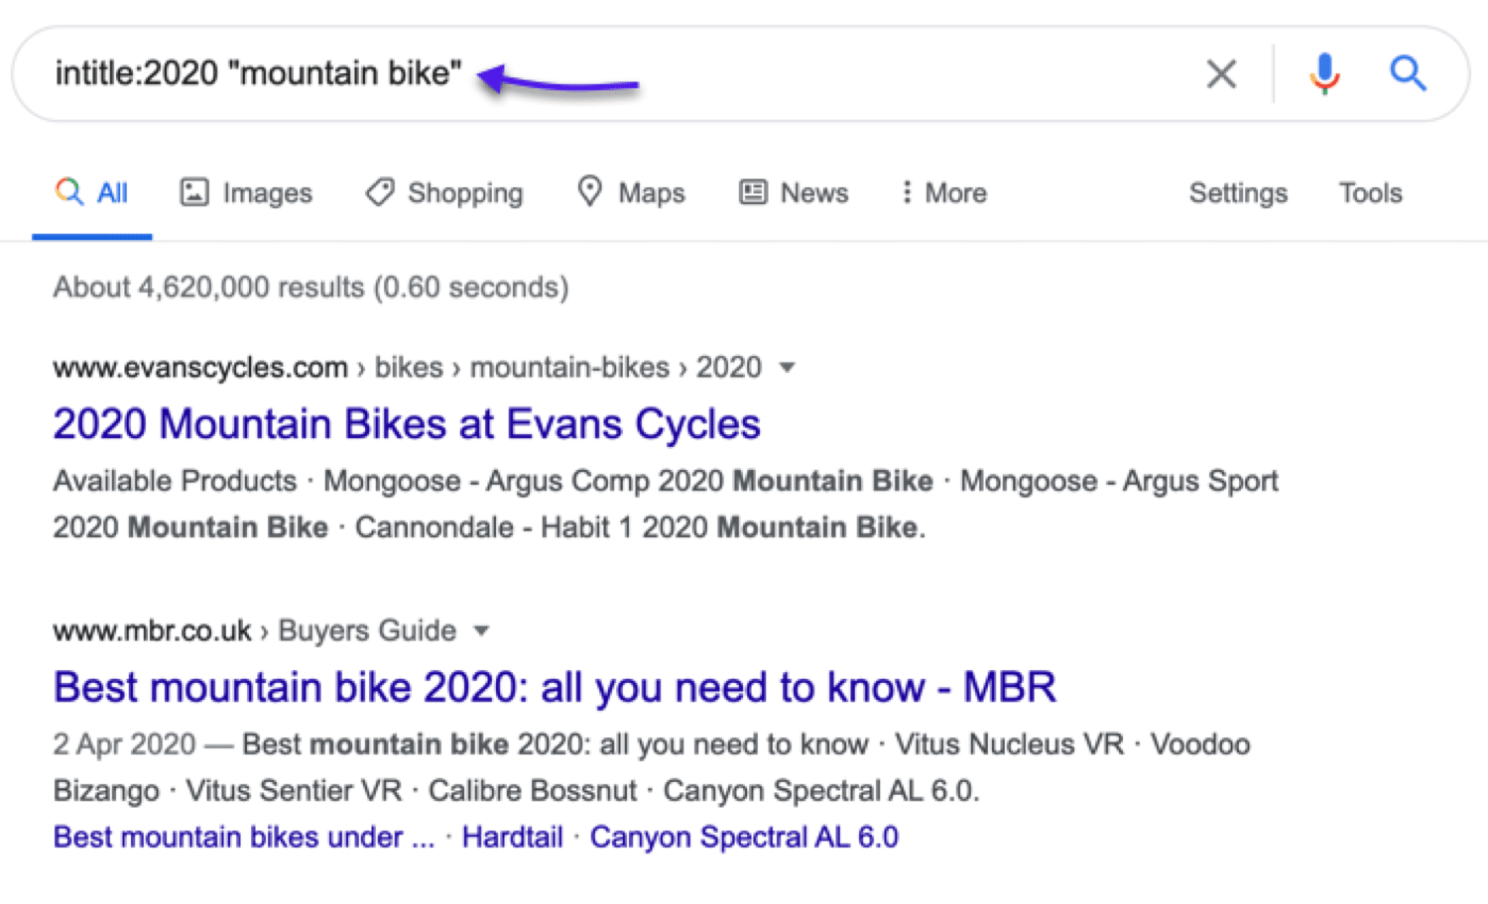  - intitle:2020 "mountain bike" sme X yy Q

Q All [E) Images <Q Shopping Maps [E News i More Settings Tools

 

About 4,620,000 results (0.60 seconds)

www.evanscycles.com » bikes » mountain-bikes » 2020 ~

2020 Mountain Bikes at Evans Cycles

Available Products - Mongoose - Argus Comp 2020 Mountain Bike - Mongoose - Argus Sport
2020 Mountain Bike - Cannondale - Habit 1 2020 Mountain Bike.

www.mbr.co.uk » Buyers Guide ~

Best mountain bike 2020: all you need to know - MBR

2 Apr 2020 — Best mountain bike 2020: all you need to know - Vitus Nucleus VR - Voodoo
Bizango - Vitus Sentier VR - Calibre Bossnut - Canyon Spectral AL 6.0.

Best mountain bikes under ... - Hardtail - Canyon Spectral AL 6.0